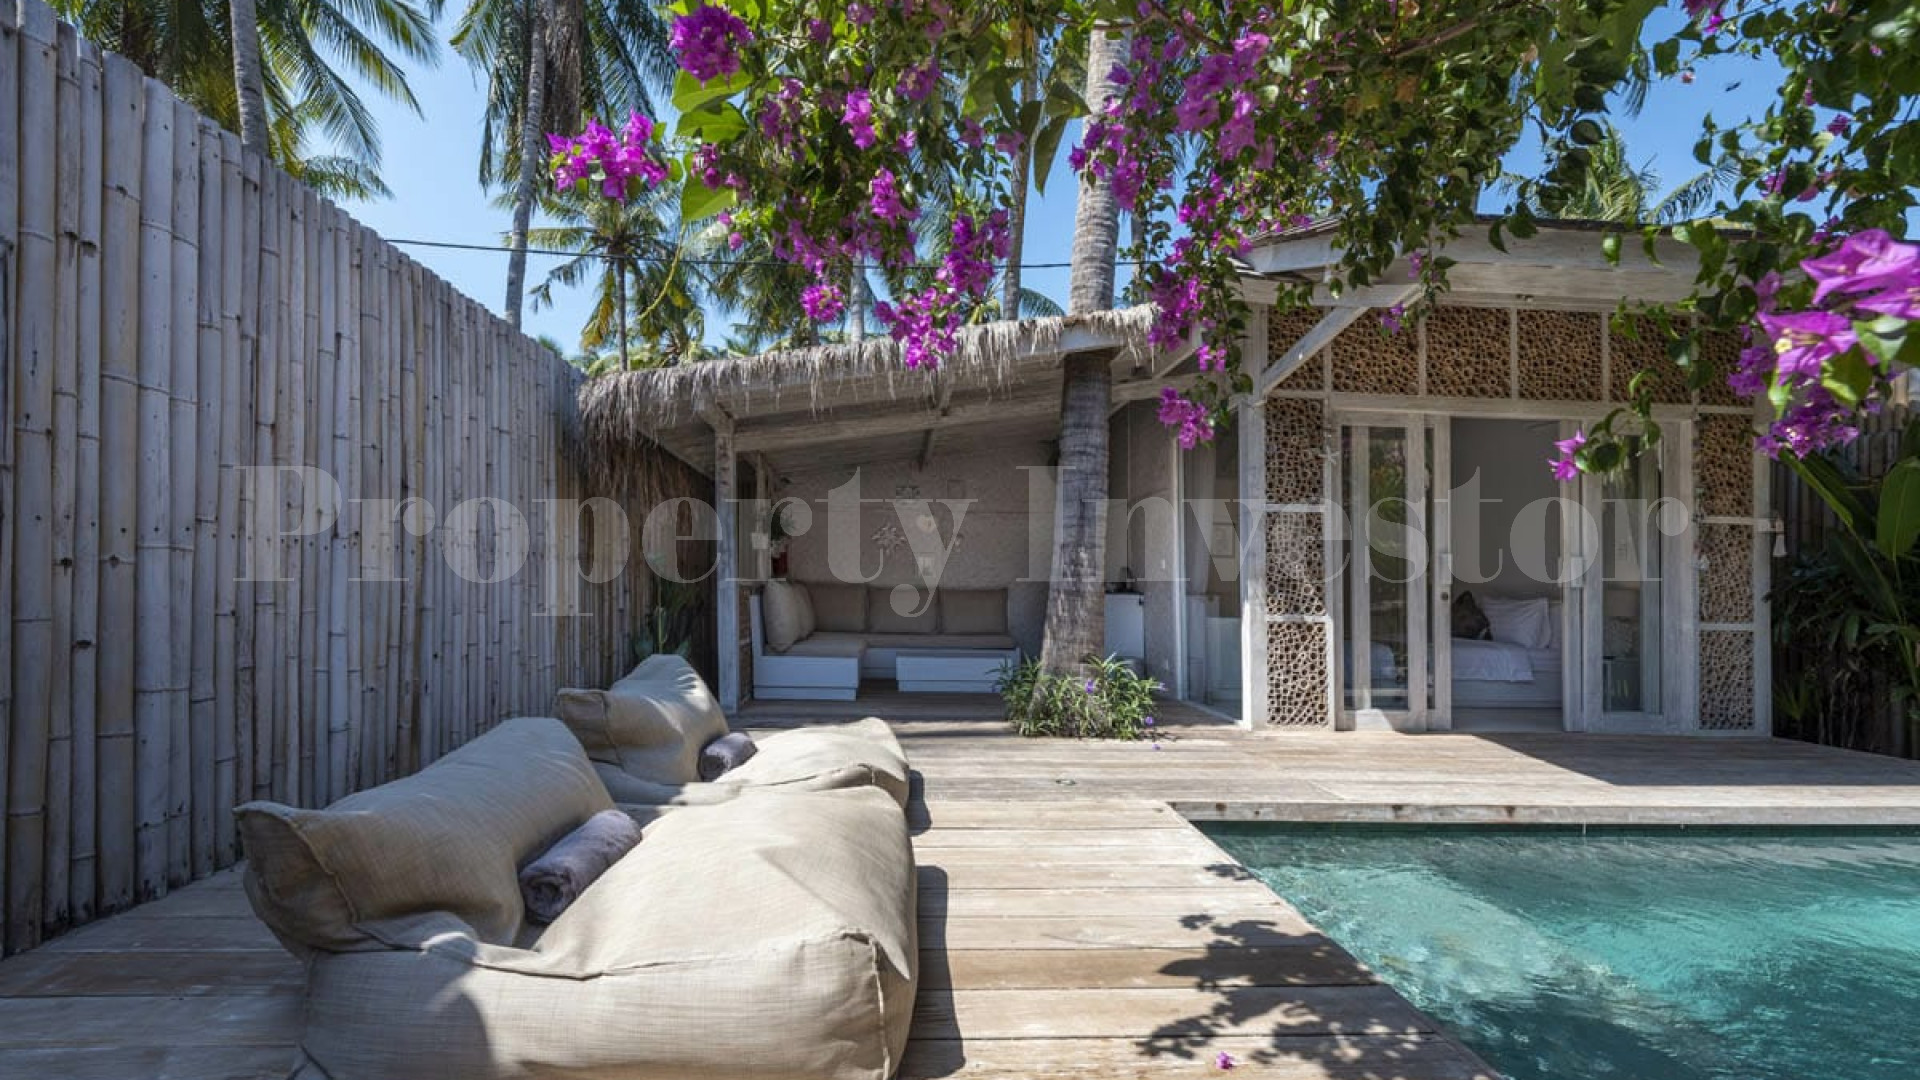 Charming 4* Boutique Hotel with 11 1-2 Bedroom Villas in the Gili Islands, Indonesia